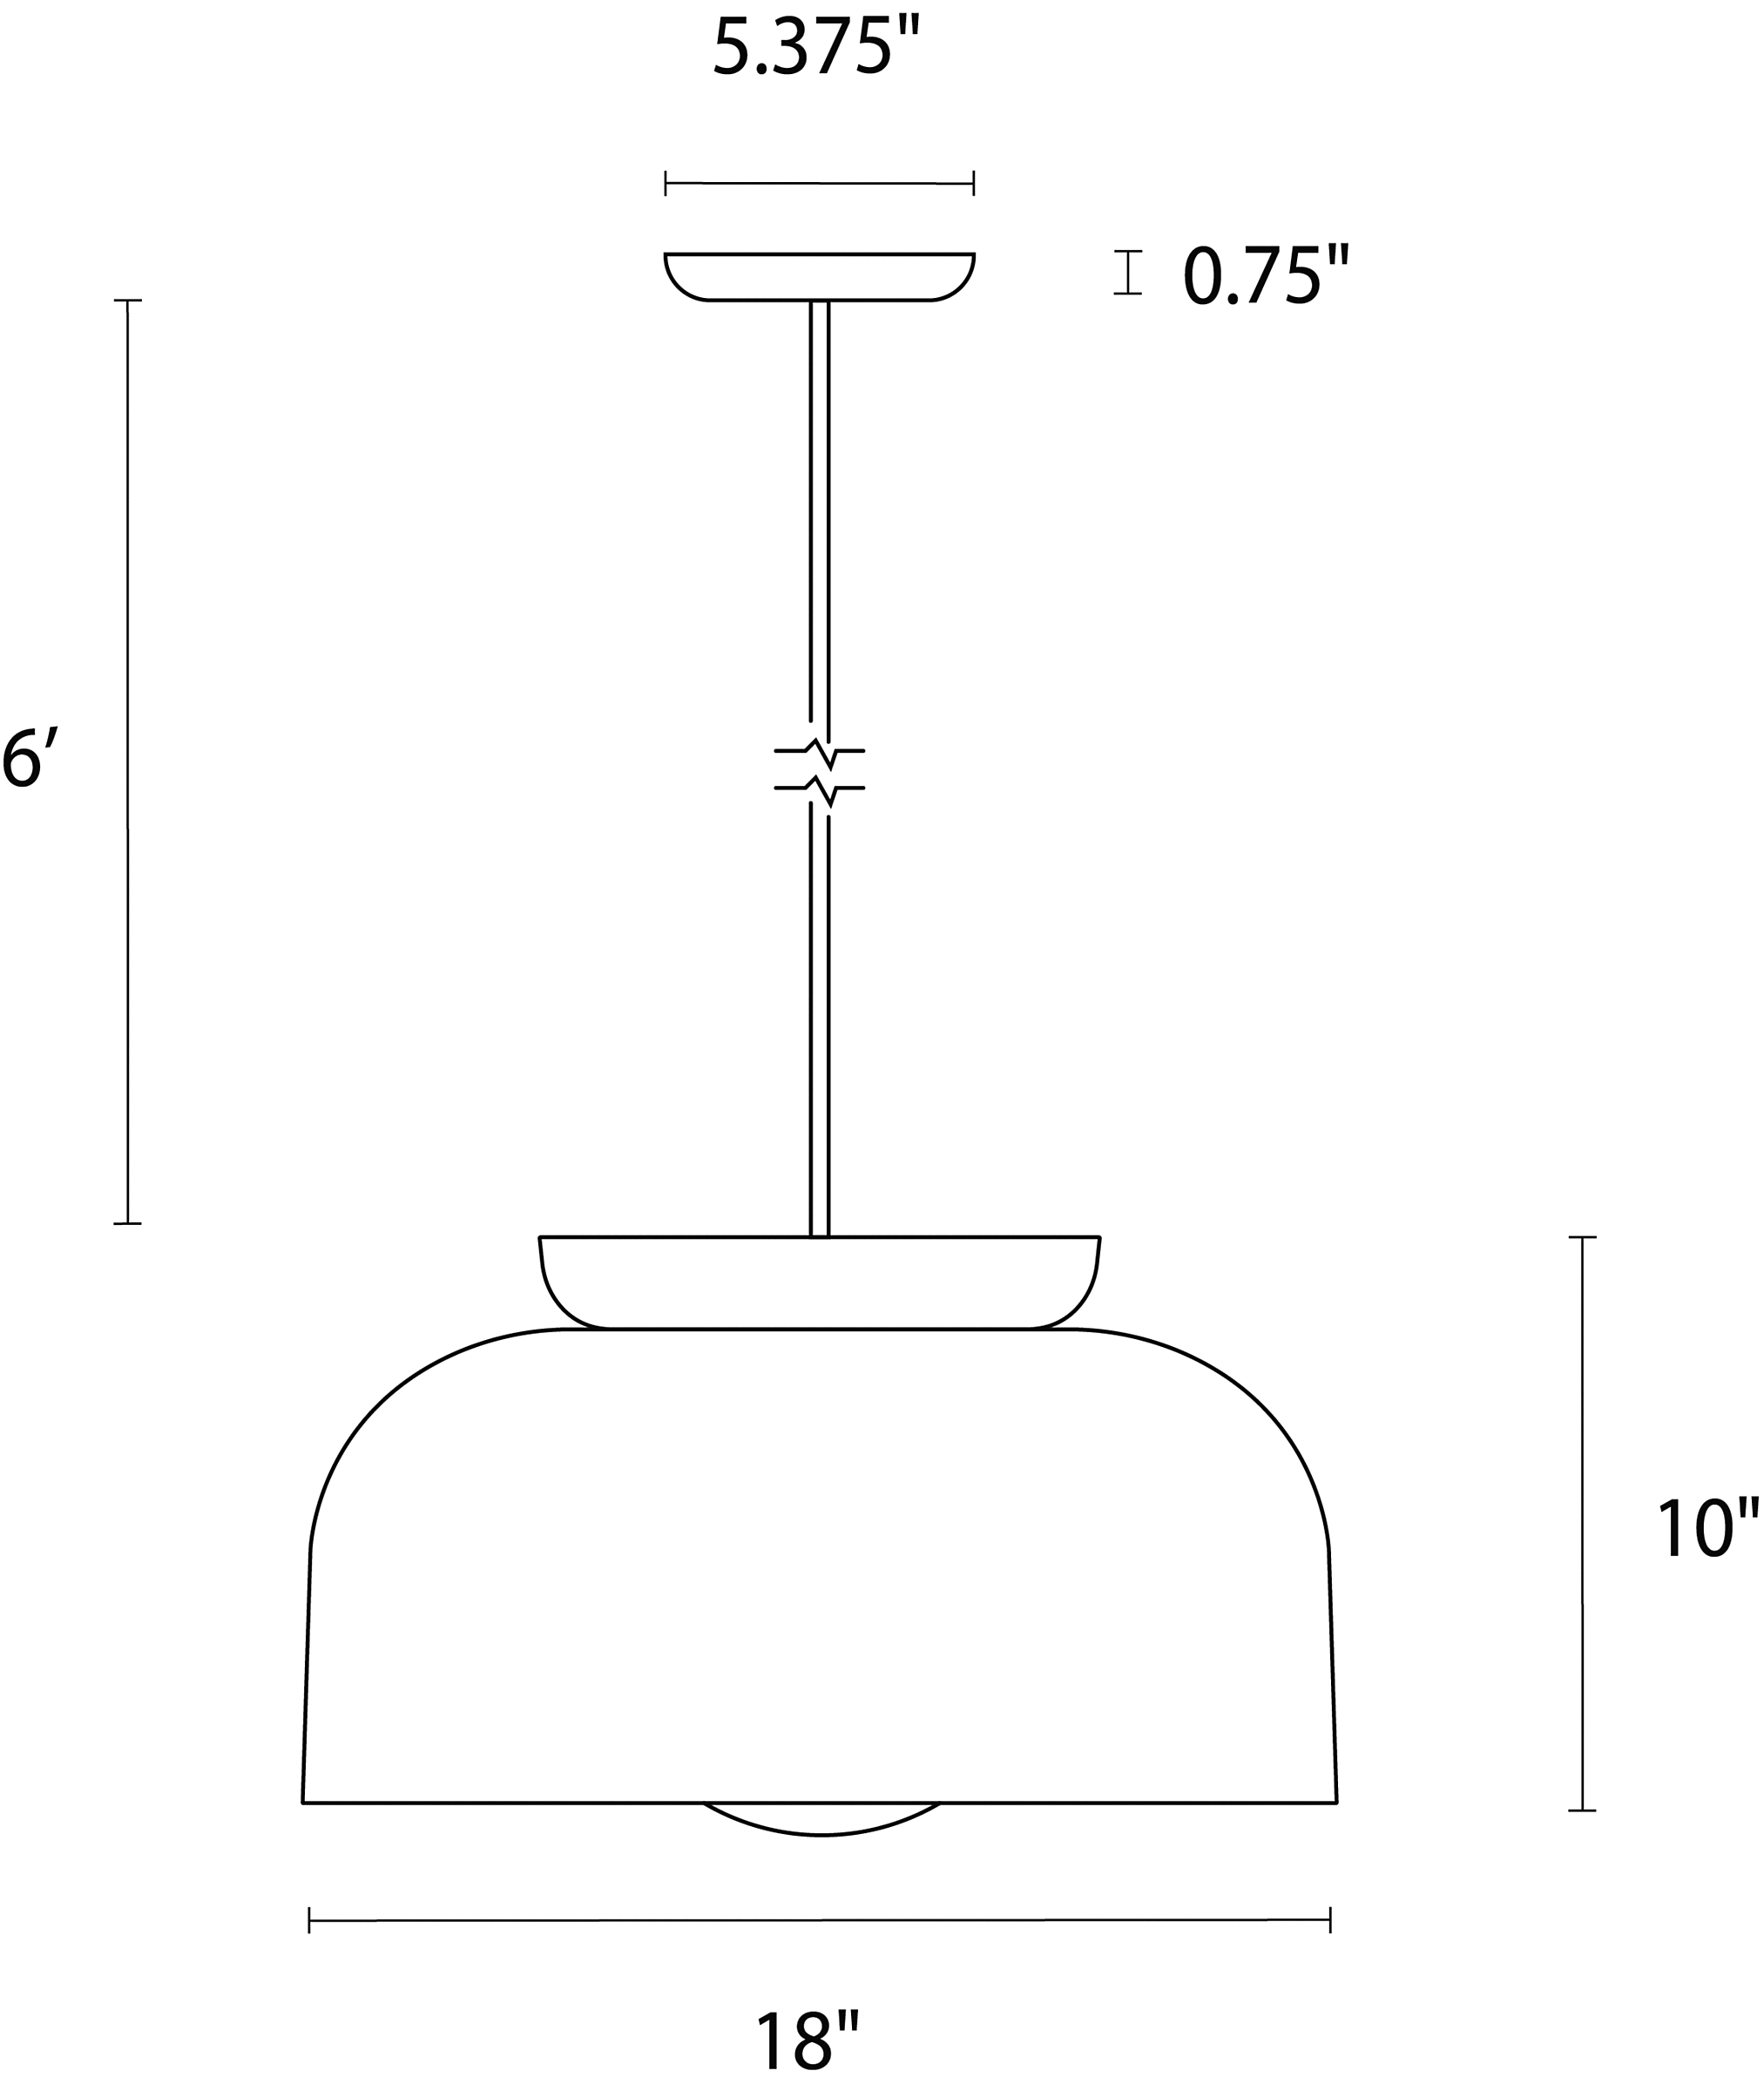 Illustration of Bray 18-round pendant with dimensions.